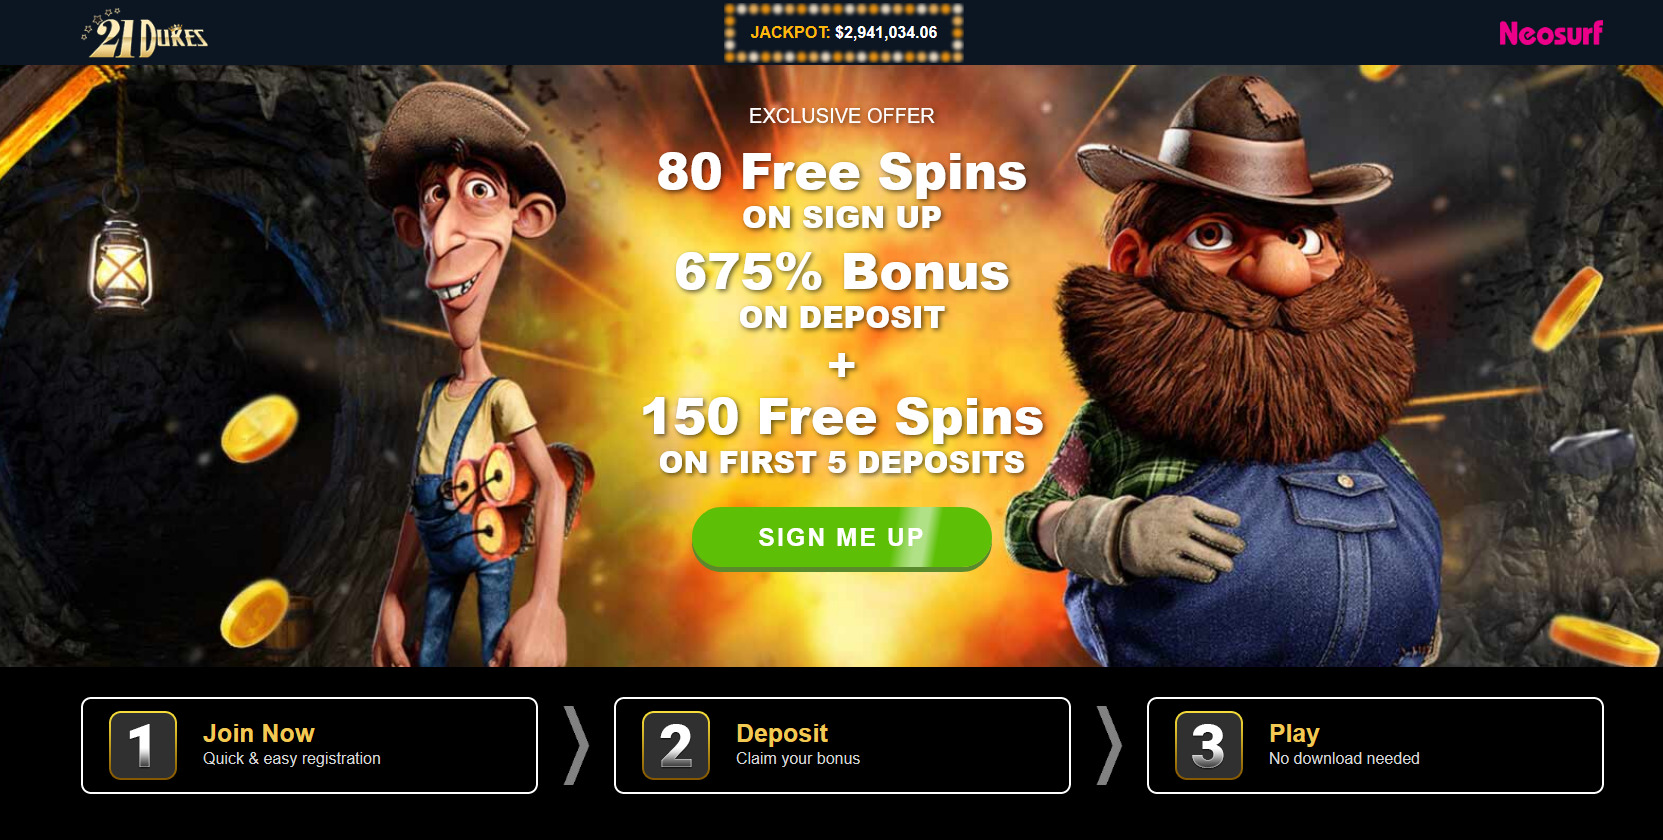 80 Free Spin on SU + 750 Free Spins